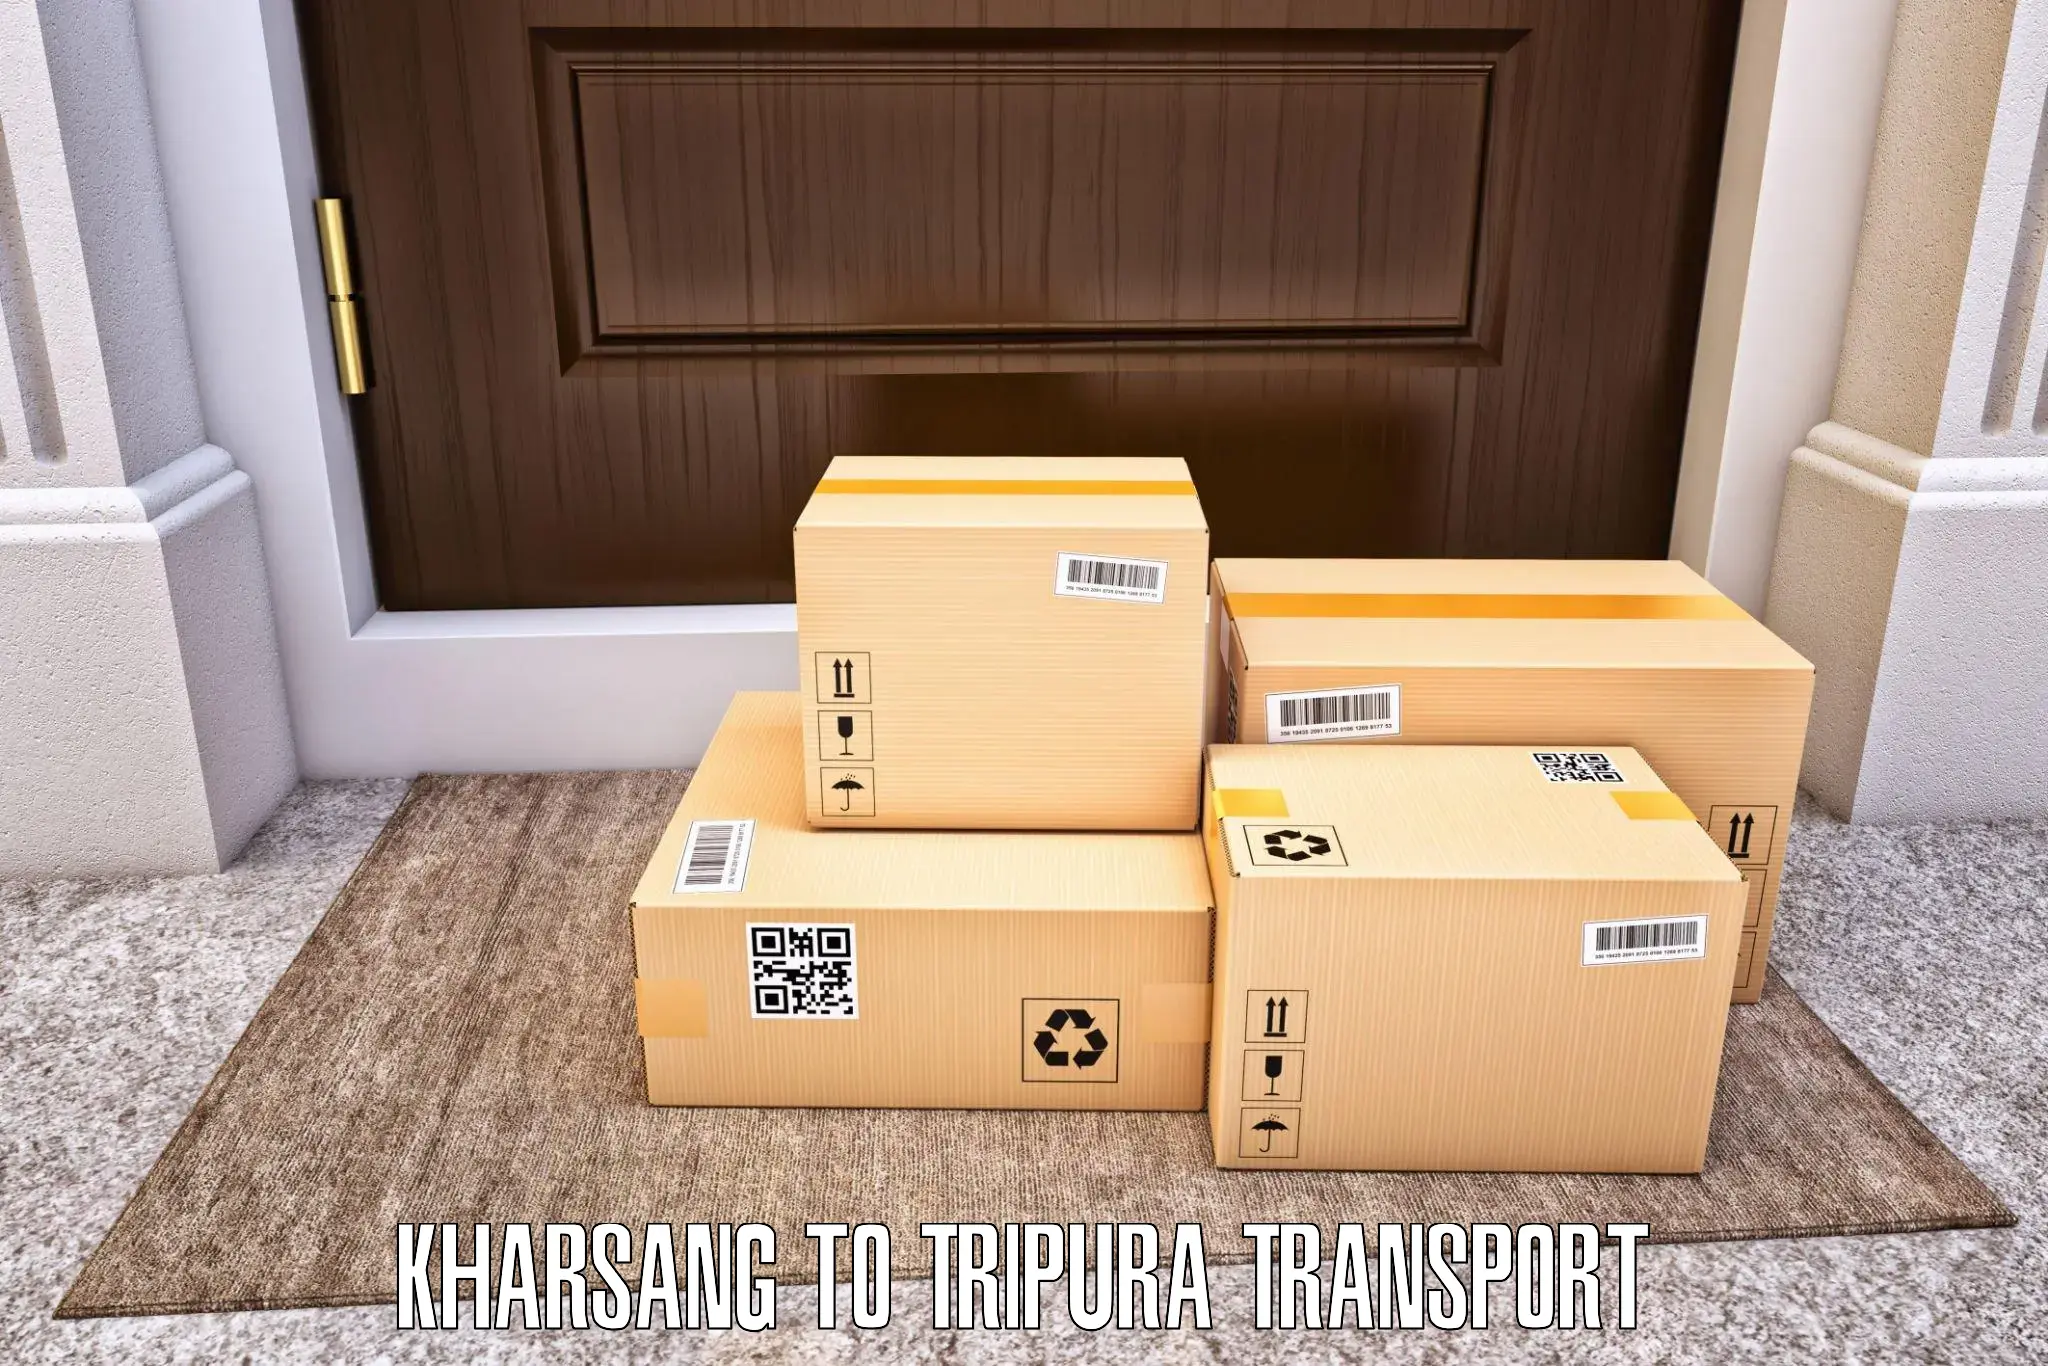 Container transport service Kharsang to Udaipur Tripura